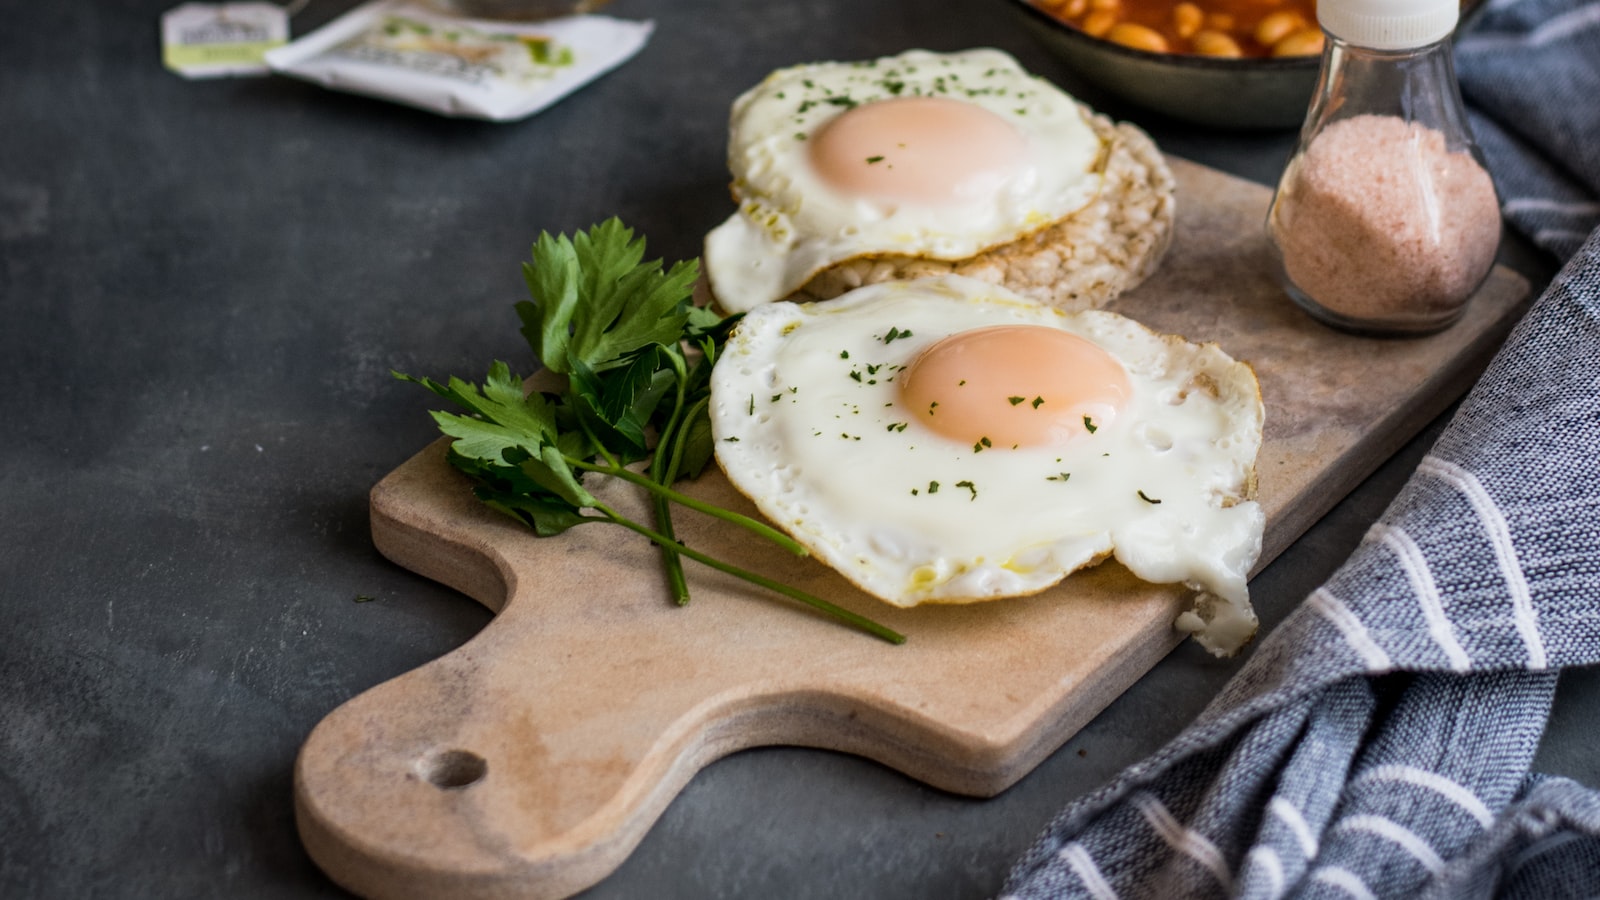 Eggcelent Entrees: Innovative Recipes to Crack Open the Potential of Eggs